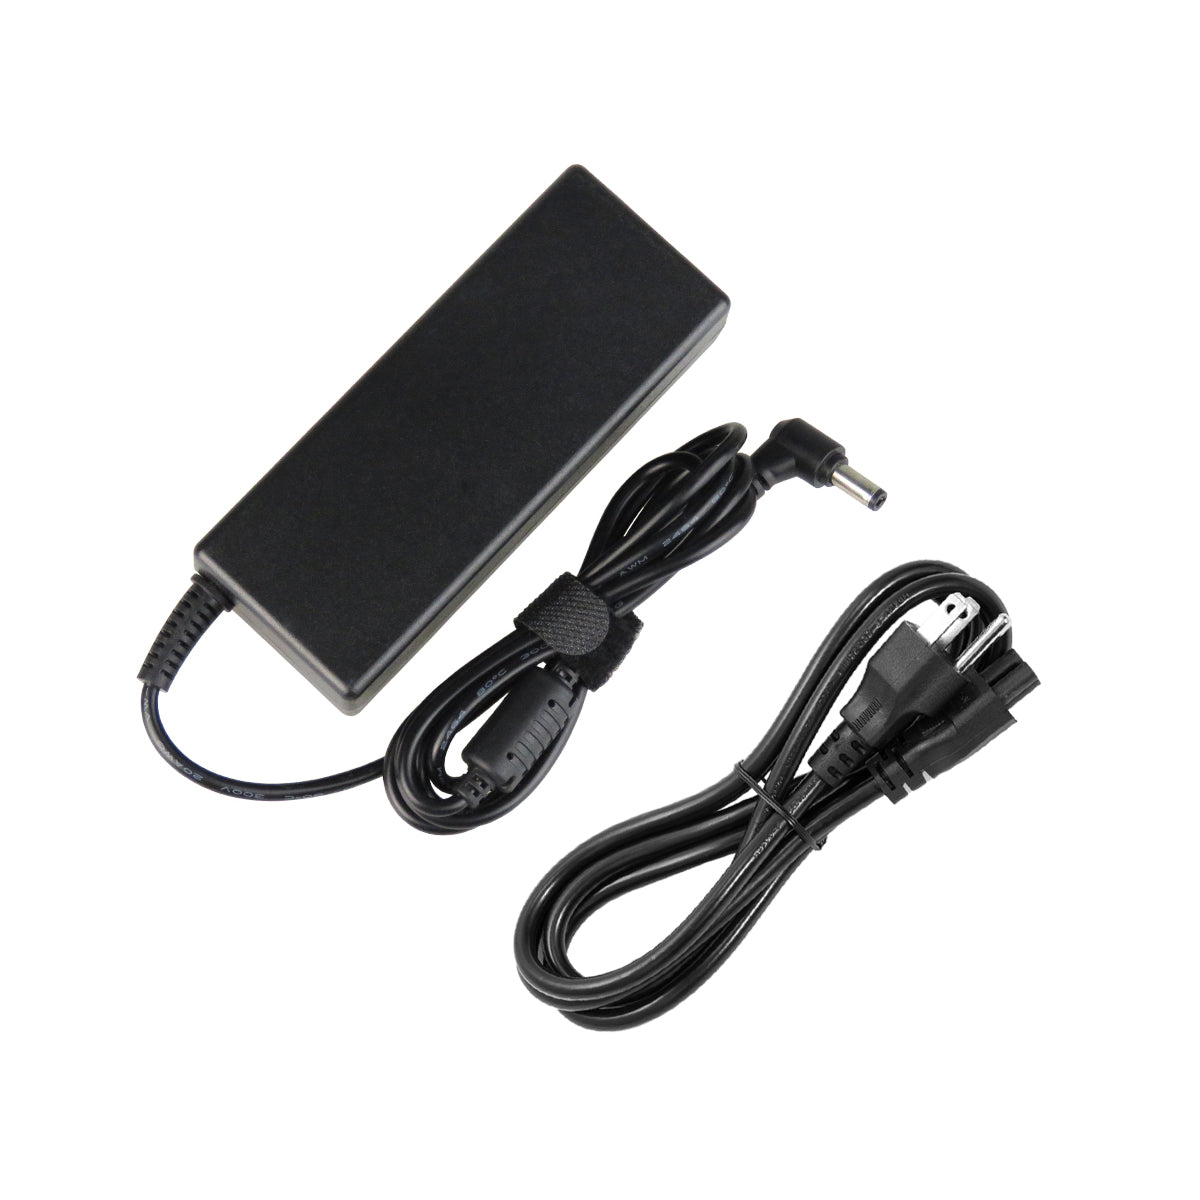 AC Adapter Charger for ASUS K43E Notebook.